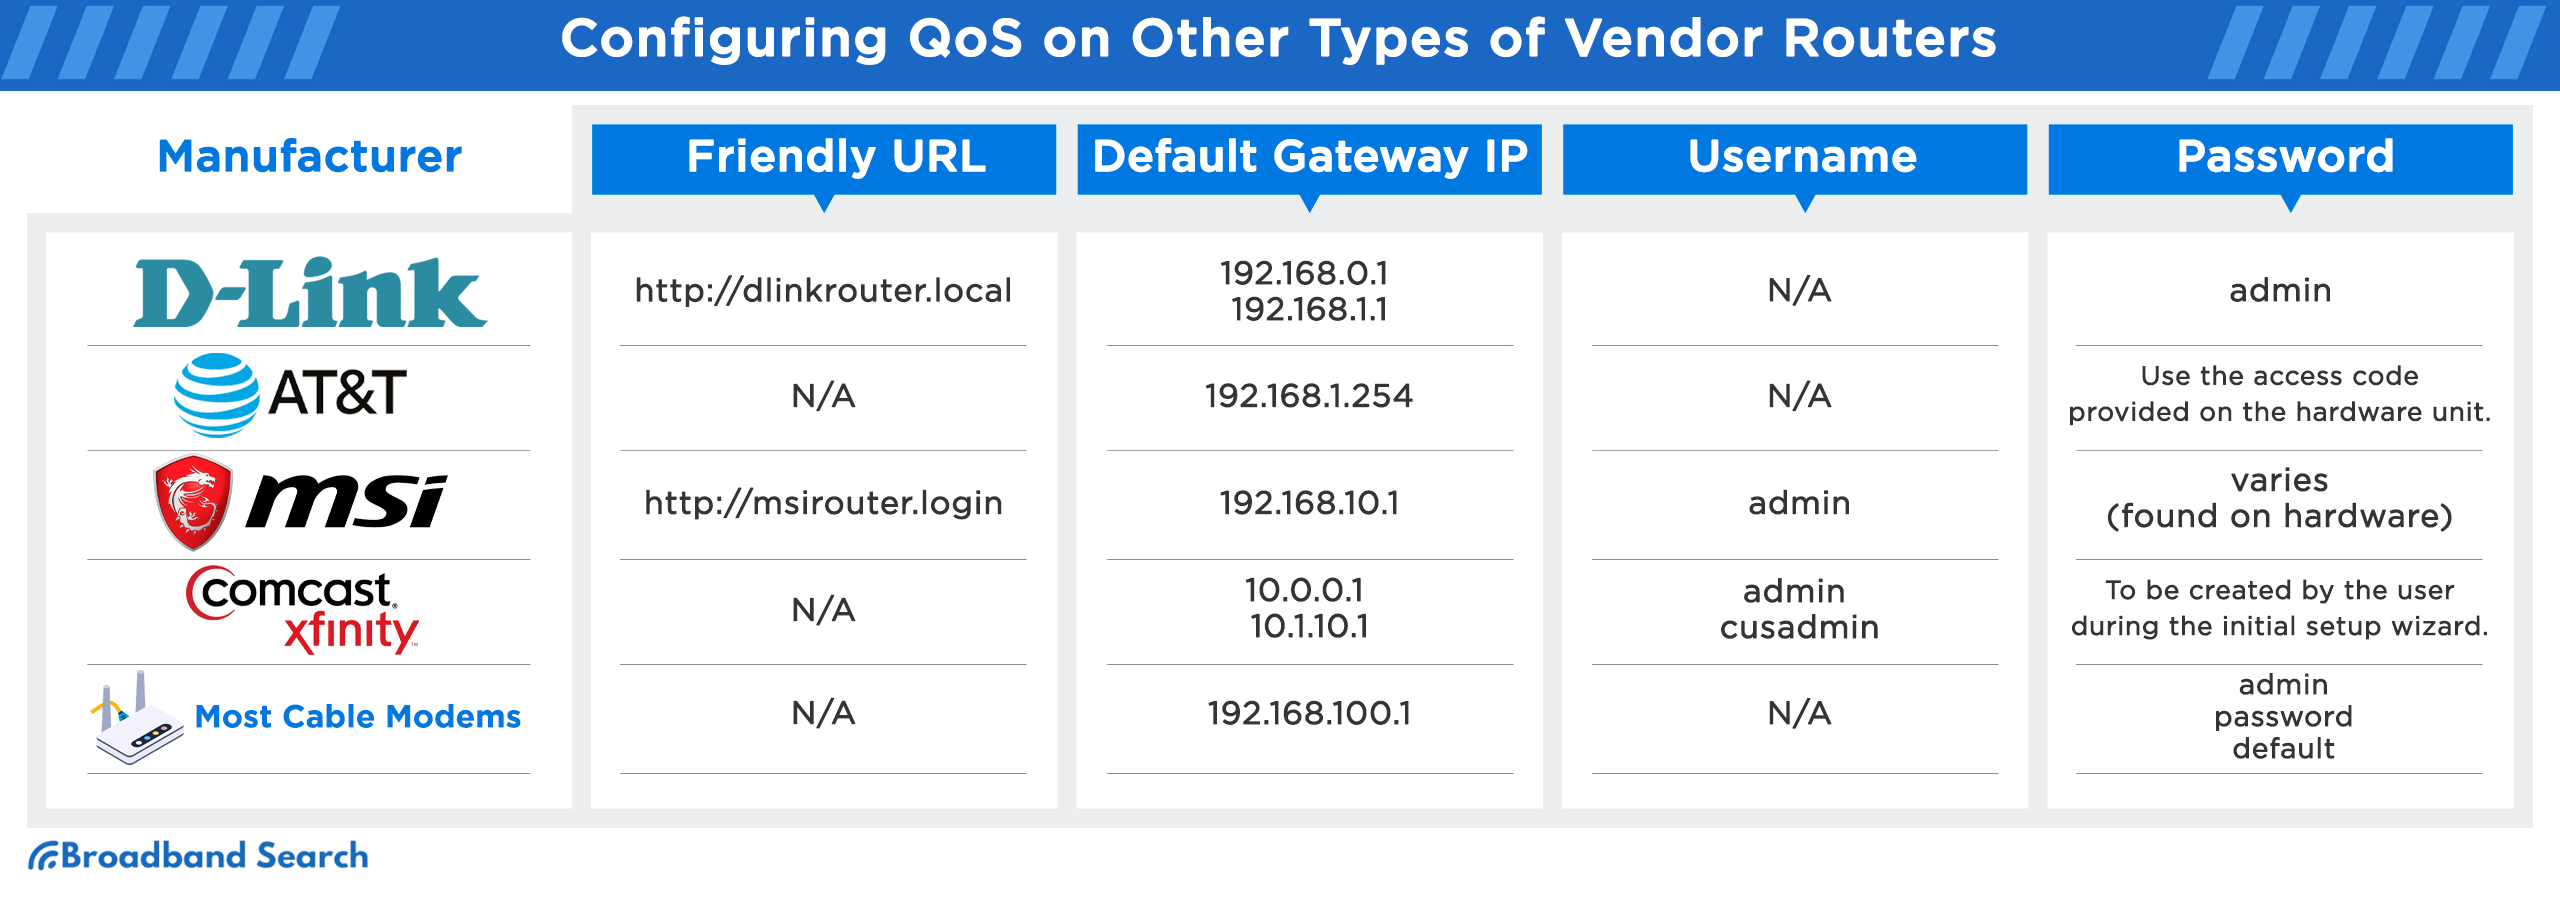 Configuring QoS on other types of vendor routers